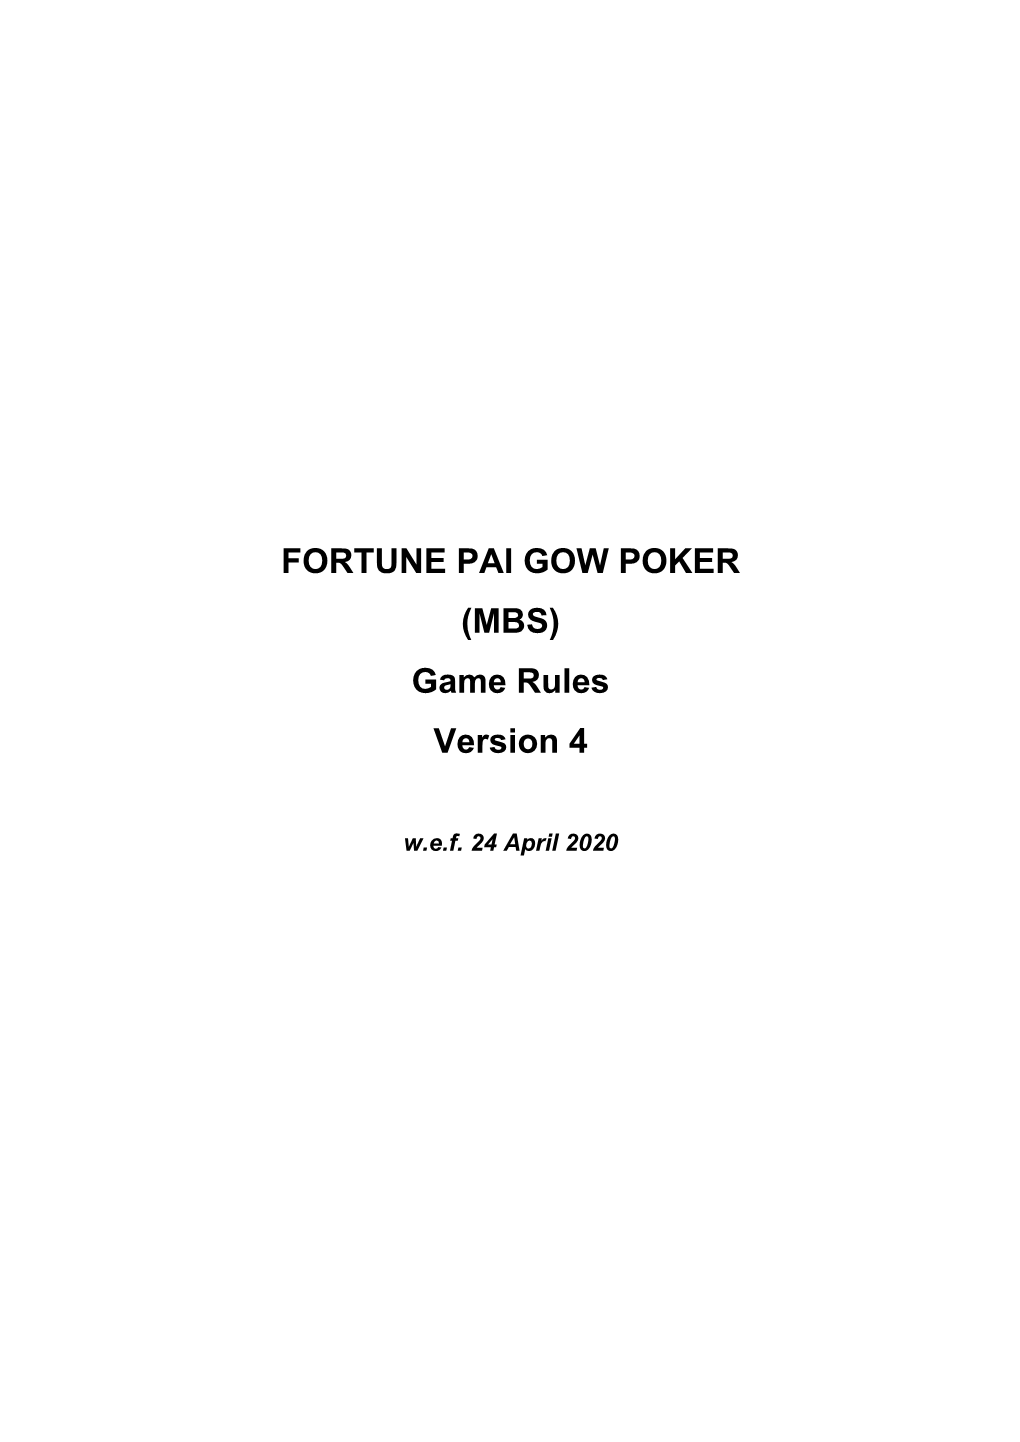 FORTUNE PAI GOW POKER (MBS) Game Rules Version 4